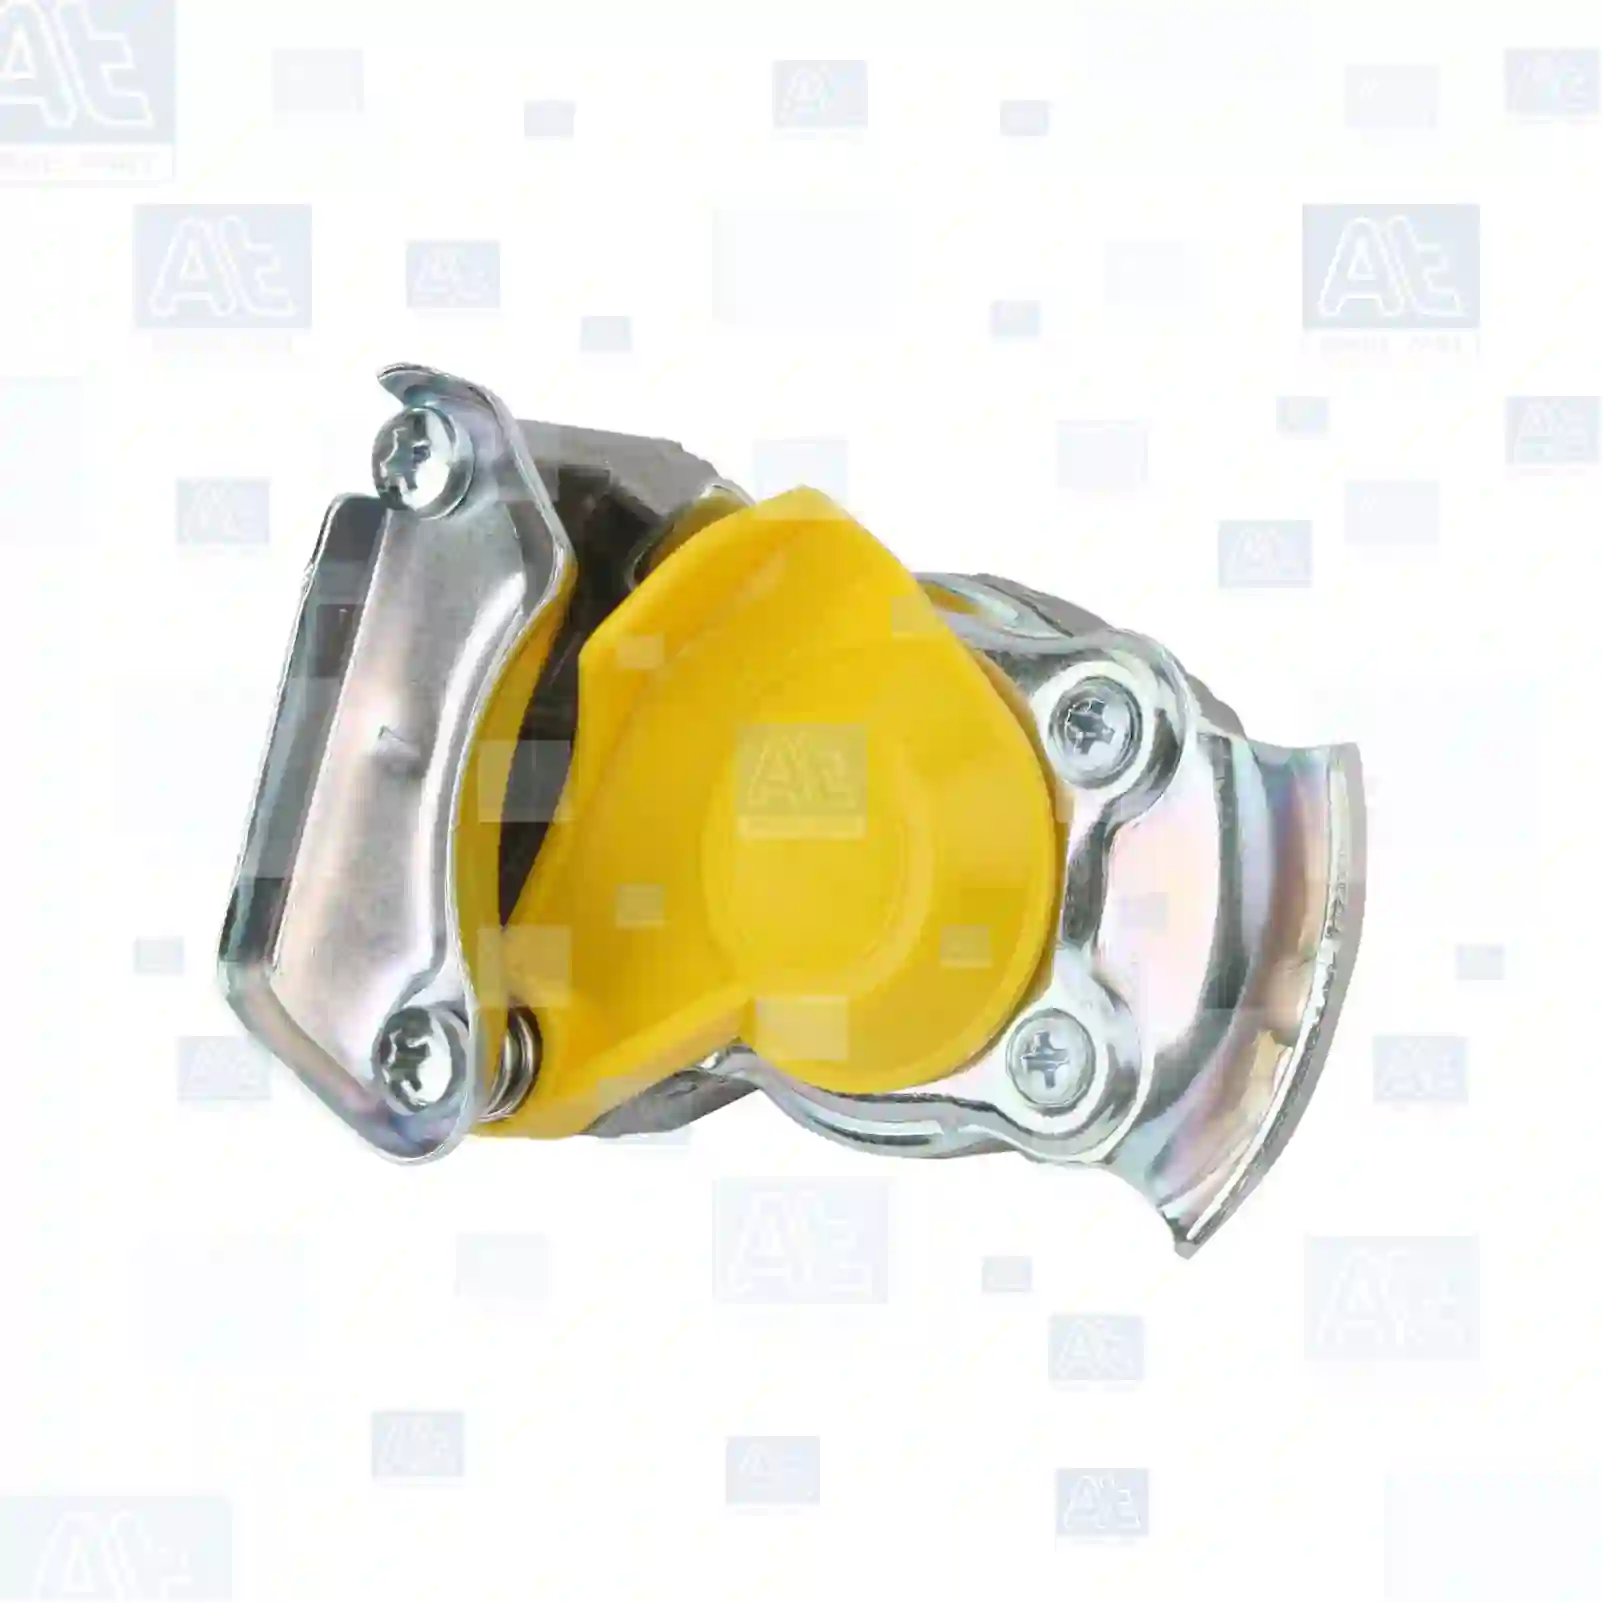 Palm coupling, yellow lid, 77714418, 605205100, 0218240400, 0031200, 1506436, 1642263, 31200, 868141, 868142, ACU8710, 02379560, 02516345, 02516835, 02516904, 02521365, 41035633, 41035634, 5006210386, 60135772, 61259650, 61259651, A2342200, CF3505858, 150880, 02379560, 02516345, 02516835, 02516904, 02521365, 2379560, 2516345, 2516835, 2516904, 2521365, 41035634, 61259651, 182796, 500945000, 945000, 502966708, 502966777, 502998301, 81512206038, 81512206040, 81512206043, 81512206067, 81512206071, 81512206076, 81512206127, 0004293830, 0004295130, 0004295430, 0004295930, 0004297930, 0004299530, F001009, 0037534500, 5000608012, 5021170410, 4425012200, 1112486, 1912280, 20167486, 330302, 051425, 8285192000, 1568341, ZG50553-0008 ||  77714418 At Spare Part | Engine, Accelerator Pedal, Camshaft, Connecting Rod, Crankcase, Crankshaft, Cylinder Head, Engine Suspension Mountings, Exhaust Manifold, Exhaust Gas Recirculation, Filter Kits, Flywheel Housing, General Overhaul Kits, Engine, Intake Manifold, Oil Cleaner, Oil Cooler, Oil Filter, Oil Pump, Oil Sump, Piston & Liner, Sensor & Switch, Timing Case, Turbocharger, Cooling System, Belt Tensioner, Coolant Filter, Coolant Pipe, Corrosion Prevention Agent, Drive, Expansion Tank, Fan, Intercooler, Monitors & Gauges, Radiator, Thermostat, V-Belt / Timing belt, Water Pump, Fuel System, Electronical Injector Unit, Feed Pump, Fuel Filter, cpl., Fuel Gauge Sender,  Fuel Line, Fuel Pump, Fuel Tank, Injection Line Kit, Injection Pump, Exhaust System, Clutch & Pedal, Gearbox, Propeller Shaft, Axles, Brake System, Hubs & Wheels, Suspension, Leaf Spring, Universal Parts / Accessories, Steering, Electrical System, Cabin Palm coupling, yellow lid, 77714418, 605205100, 0218240400, 0031200, 1506436, 1642263, 31200, 868141, 868142, ACU8710, 02379560, 02516345, 02516835, 02516904, 02521365, 41035633, 41035634, 5006210386, 60135772, 61259650, 61259651, A2342200, CF3505858, 150880, 02379560, 02516345, 02516835, 02516904, 02521365, 2379560, 2516345, 2516835, 2516904, 2521365, 41035634, 61259651, 182796, 500945000, 945000, 502966708, 502966777, 502998301, 81512206038, 81512206040, 81512206043, 81512206067, 81512206071, 81512206076, 81512206127, 0004293830, 0004295130, 0004295430, 0004295930, 0004297930, 0004299530, F001009, 0037534500, 5000608012, 5021170410, 4425012200, 1112486, 1912280, 20167486, 330302, 051425, 8285192000, 1568341, ZG50553-0008 ||  77714418 At Spare Part | Engine, Accelerator Pedal, Camshaft, Connecting Rod, Crankcase, Crankshaft, Cylinder Head, Engine Suspension Mountings, Exhaust Manifold, Exhaust Gas Recirculation, Filter Kits, Flywheel Housing, General Overhaul Kits, Engine, Intake Manifold, Oil Cleaner, Oil Cooler, Oil Filter, Oil Pump, Oil Sump, Piston & Liner, Sensor & Switch, Timing Case, Turbocharger, Cooling System, Belt Tensioner, Coolant Filter, Coolant Pipe, Corrosion Prevention Agent, Drive, Expansion Tank, Fan, Intercooler, Monitors & Gauges, Radiator, Thermostat, V-Belt / Timing belt, Water Pump, Fuel System, Electronical Injector Unit, Feed Pump, Fuel Filter, cpl., Fuel Gauge Sender,  Fuel Line, Fuel Pump, Fuel Tank, Injection Line Kit, Injection Pump, Exhaust System, Clutch & Pedal, Gearbox, Propeller Shaft, Axles, Brake System, Hubs & Wheels, Suspension, Leaf Spring, Universal Parts / Accessories, Steering, Electrical System, Cabin